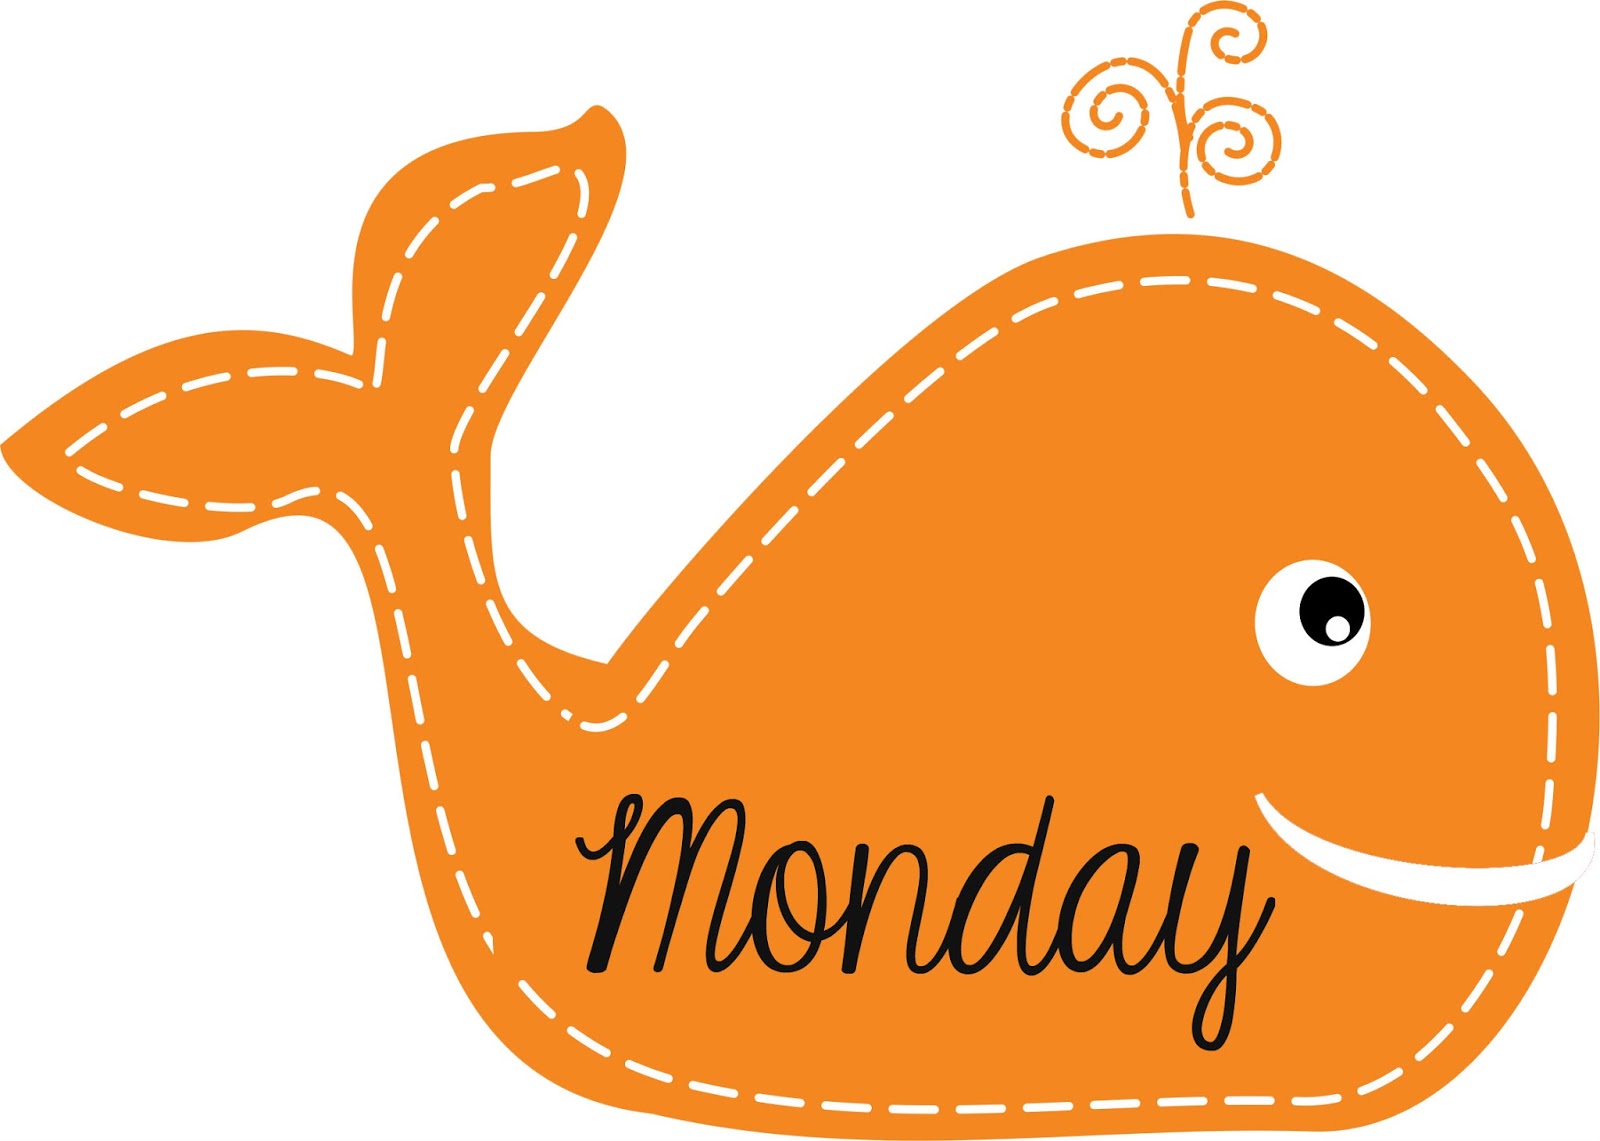 Wednesday clipart monday. Free cliparts download clip